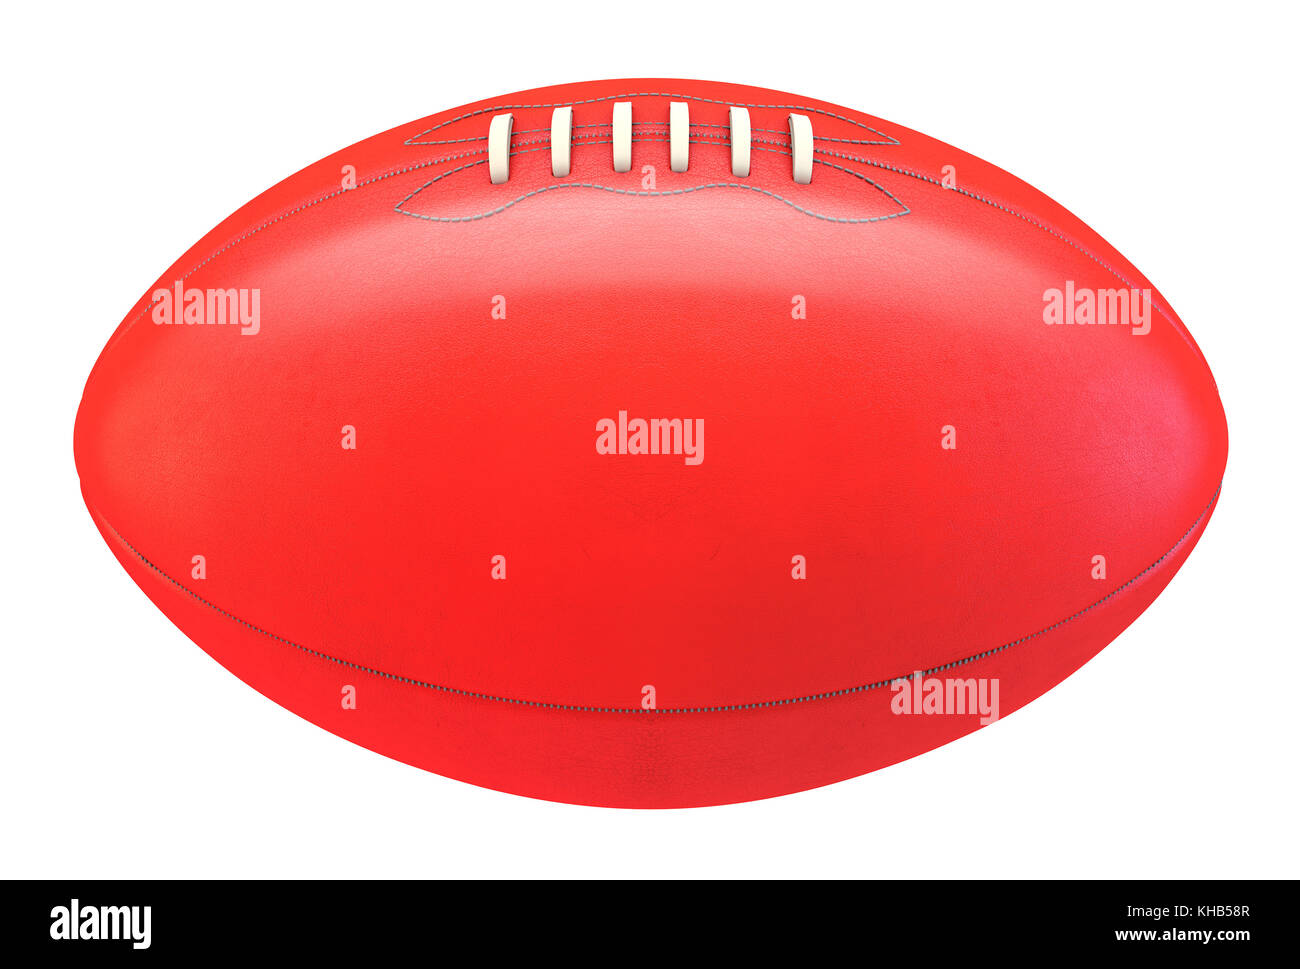 A generic unbranded aussie rules football ball on an isolated whote studio background - 3D render Stock Photo